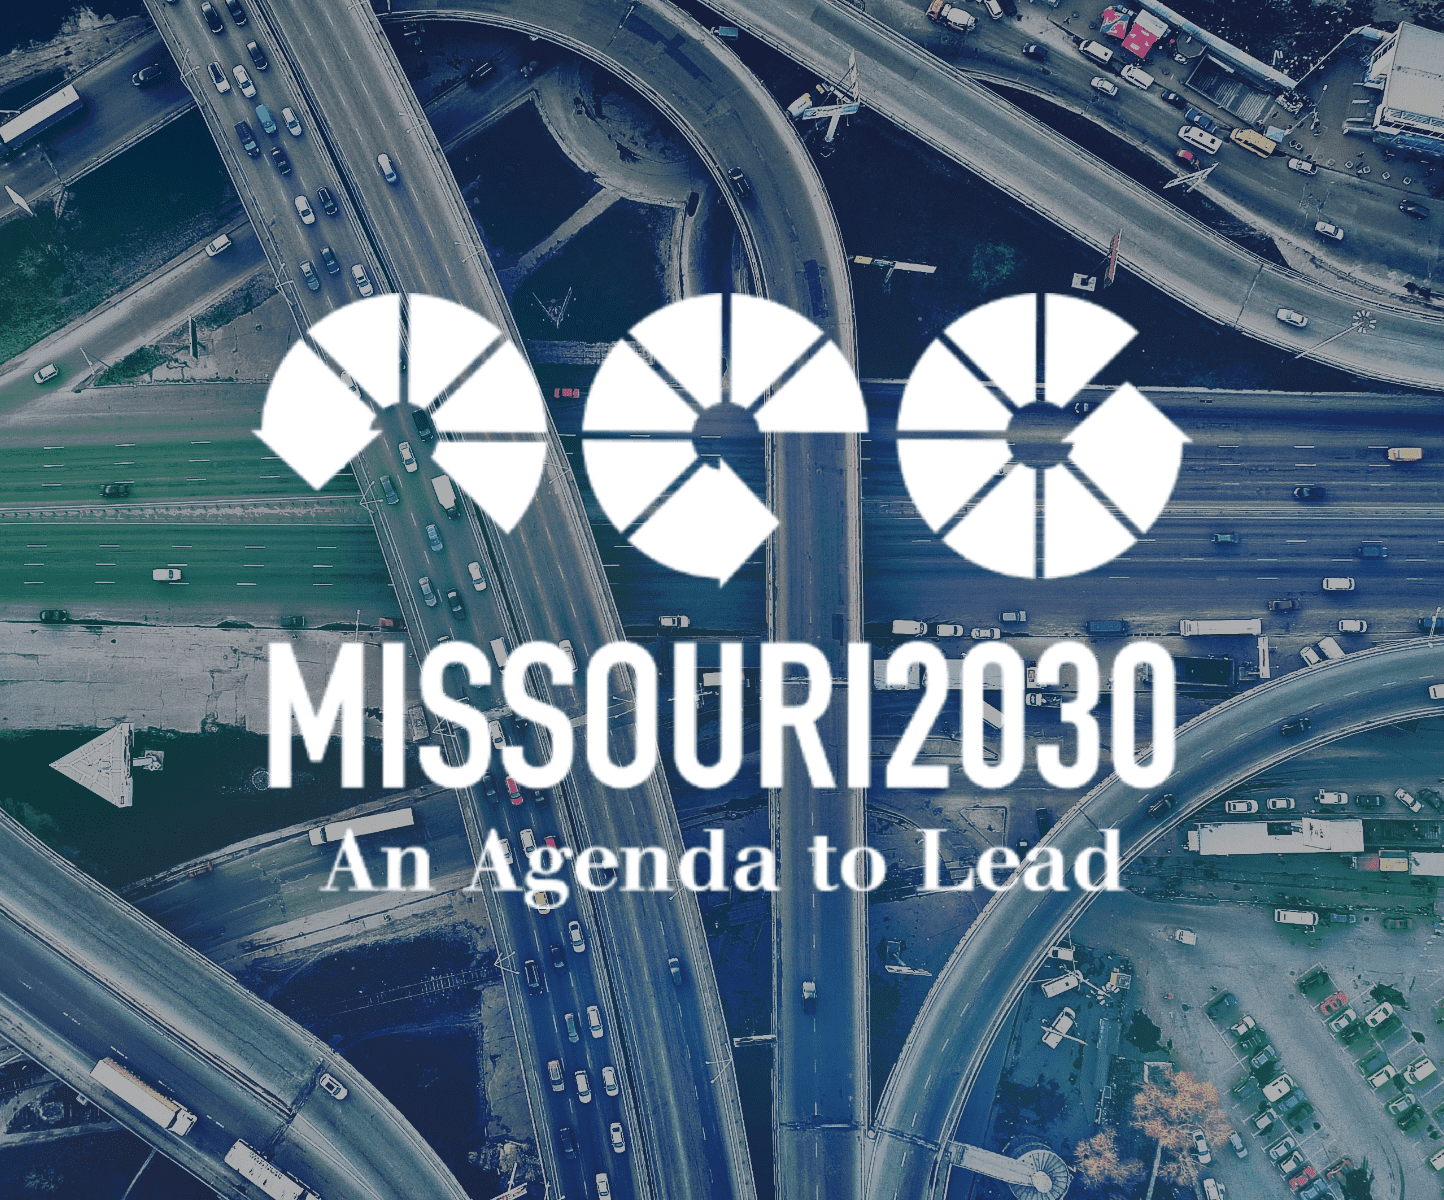 Mo2030 graphic with aerial view of Missouri Highways.